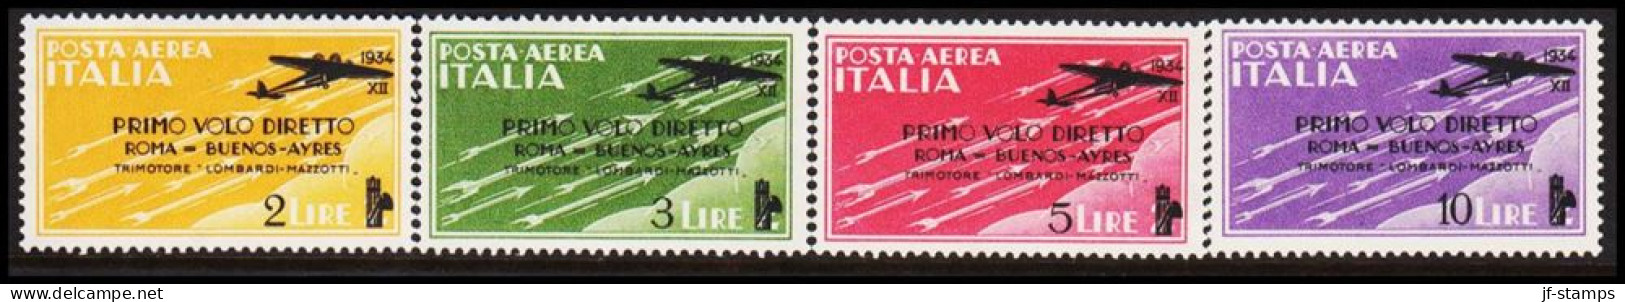 1934. ITALIANA. First Flight Rom-Buenos Aires. Complete Set With 4 Fine Stamps. No Gum. (Michel 459-462) - JF544900 - Ongebruikt